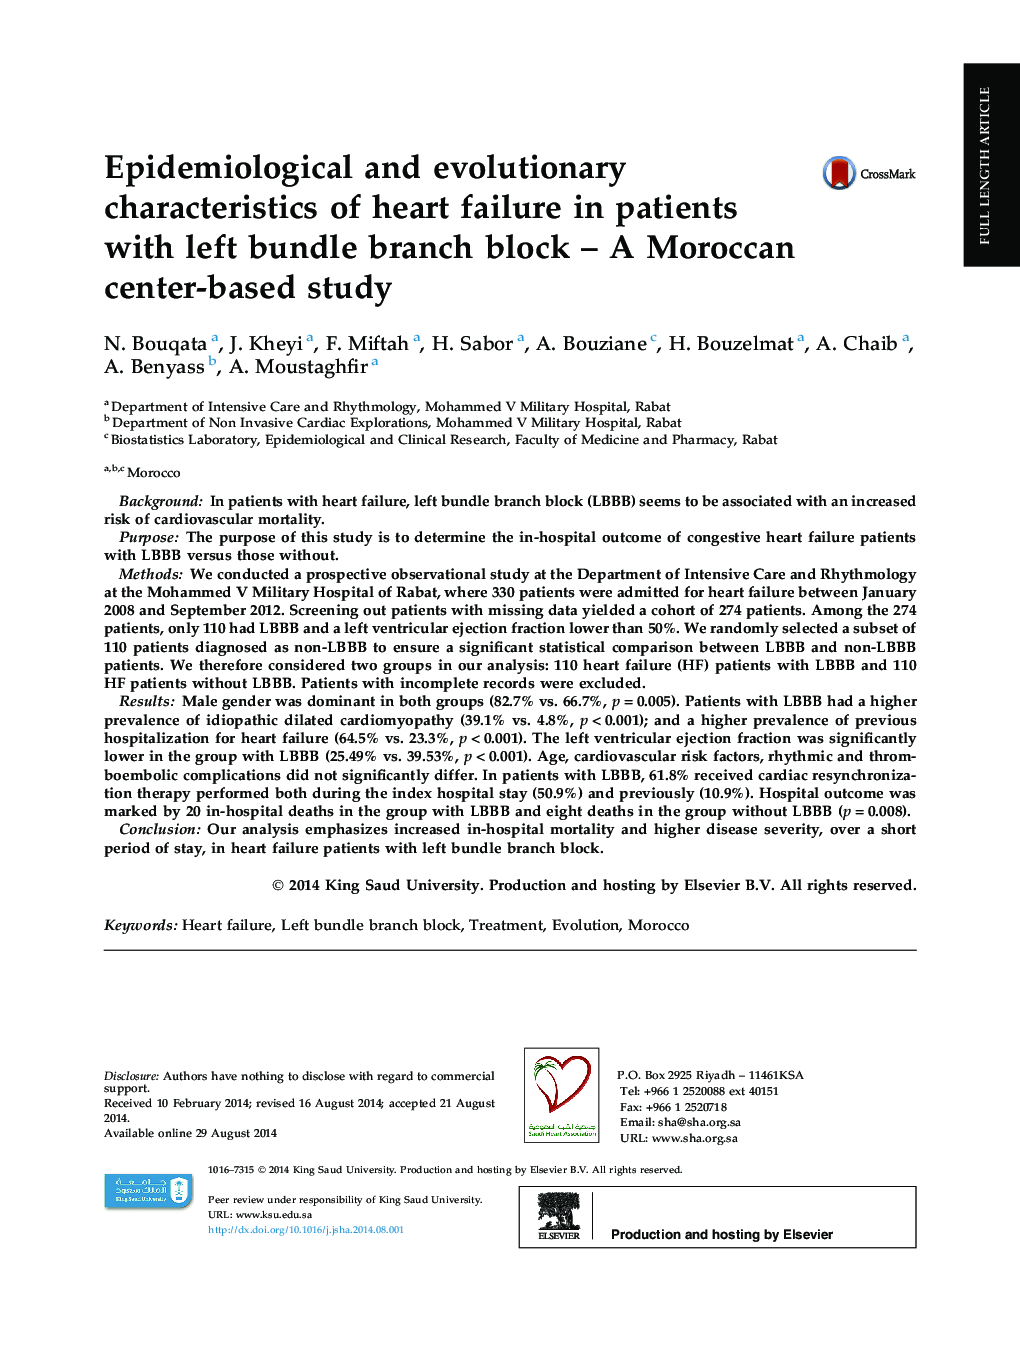 Epidemiological and evolutionary characteristics of heart failure in patients with left bundle branch block – A Moroccan center-based study 